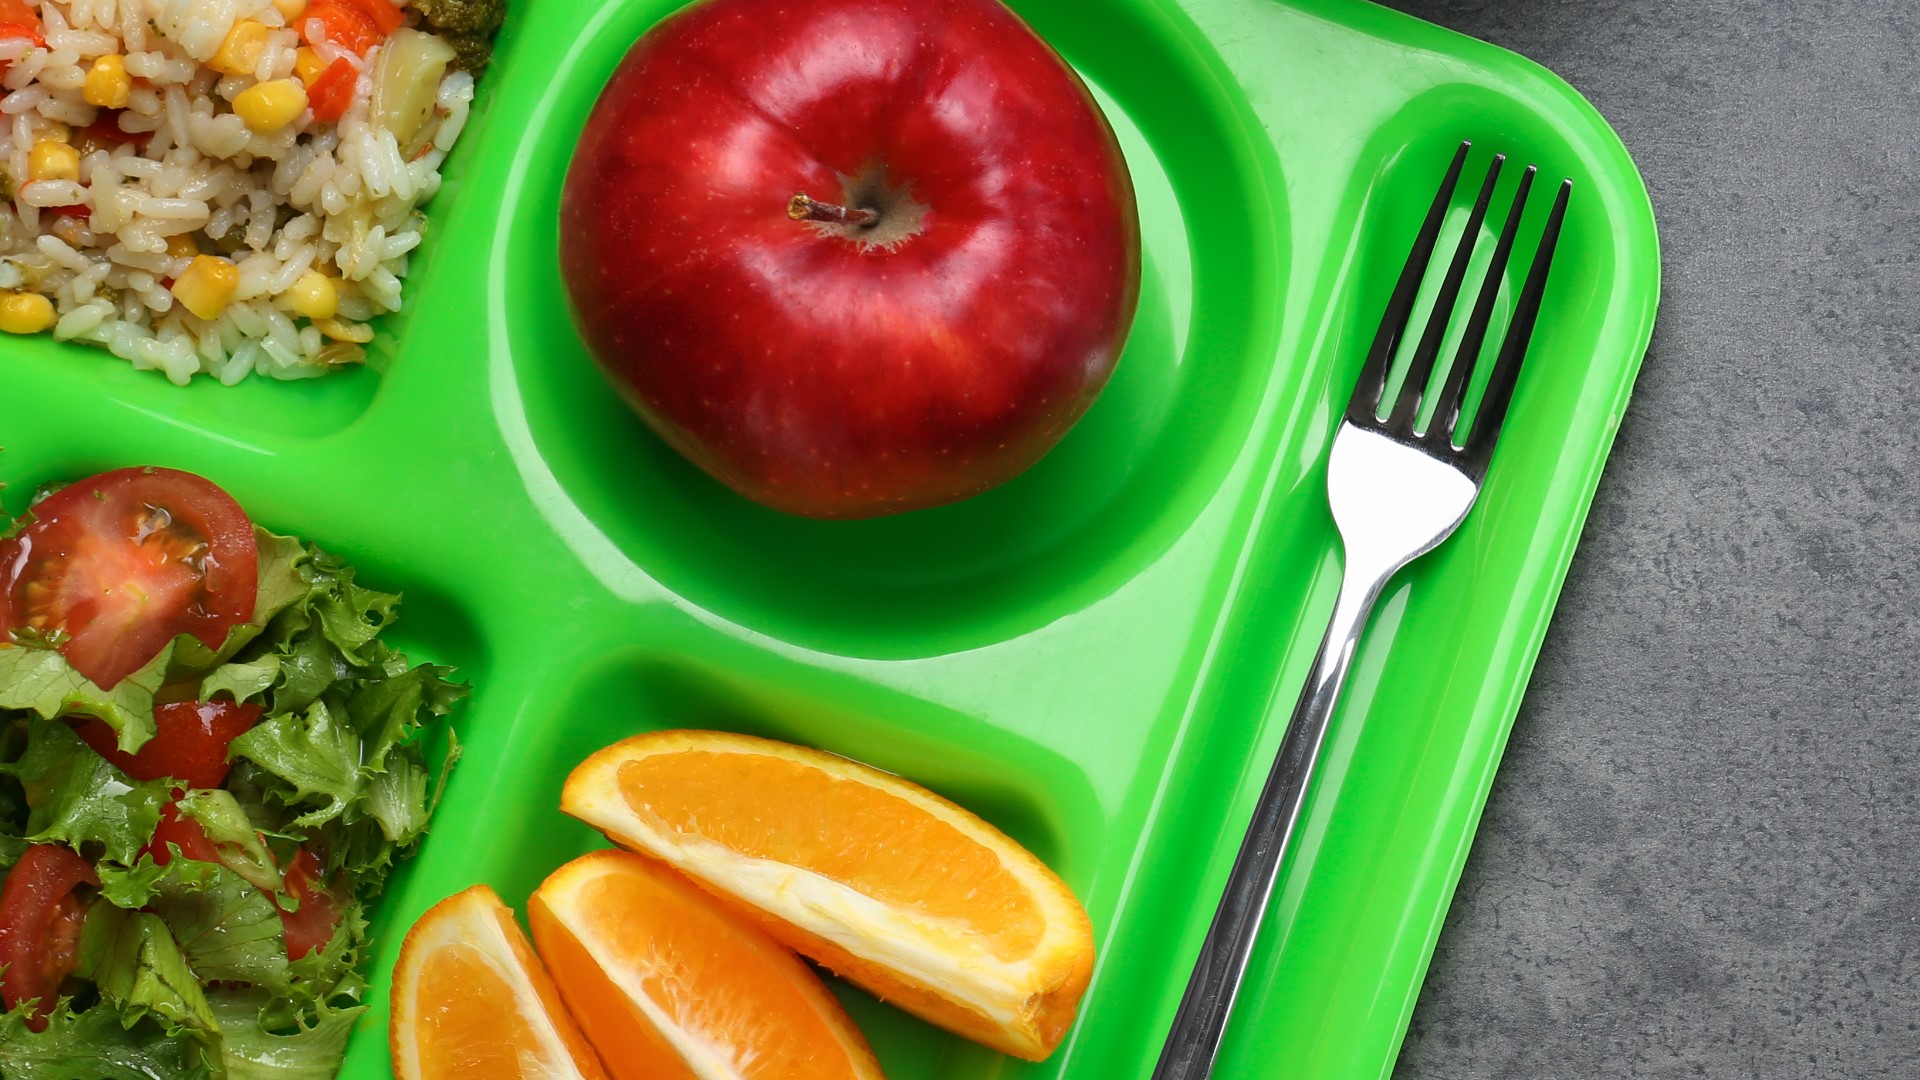 NEISD said typically students have to meet income eligibility requirements to qualify for free or reduced-price meals, but that's changing.